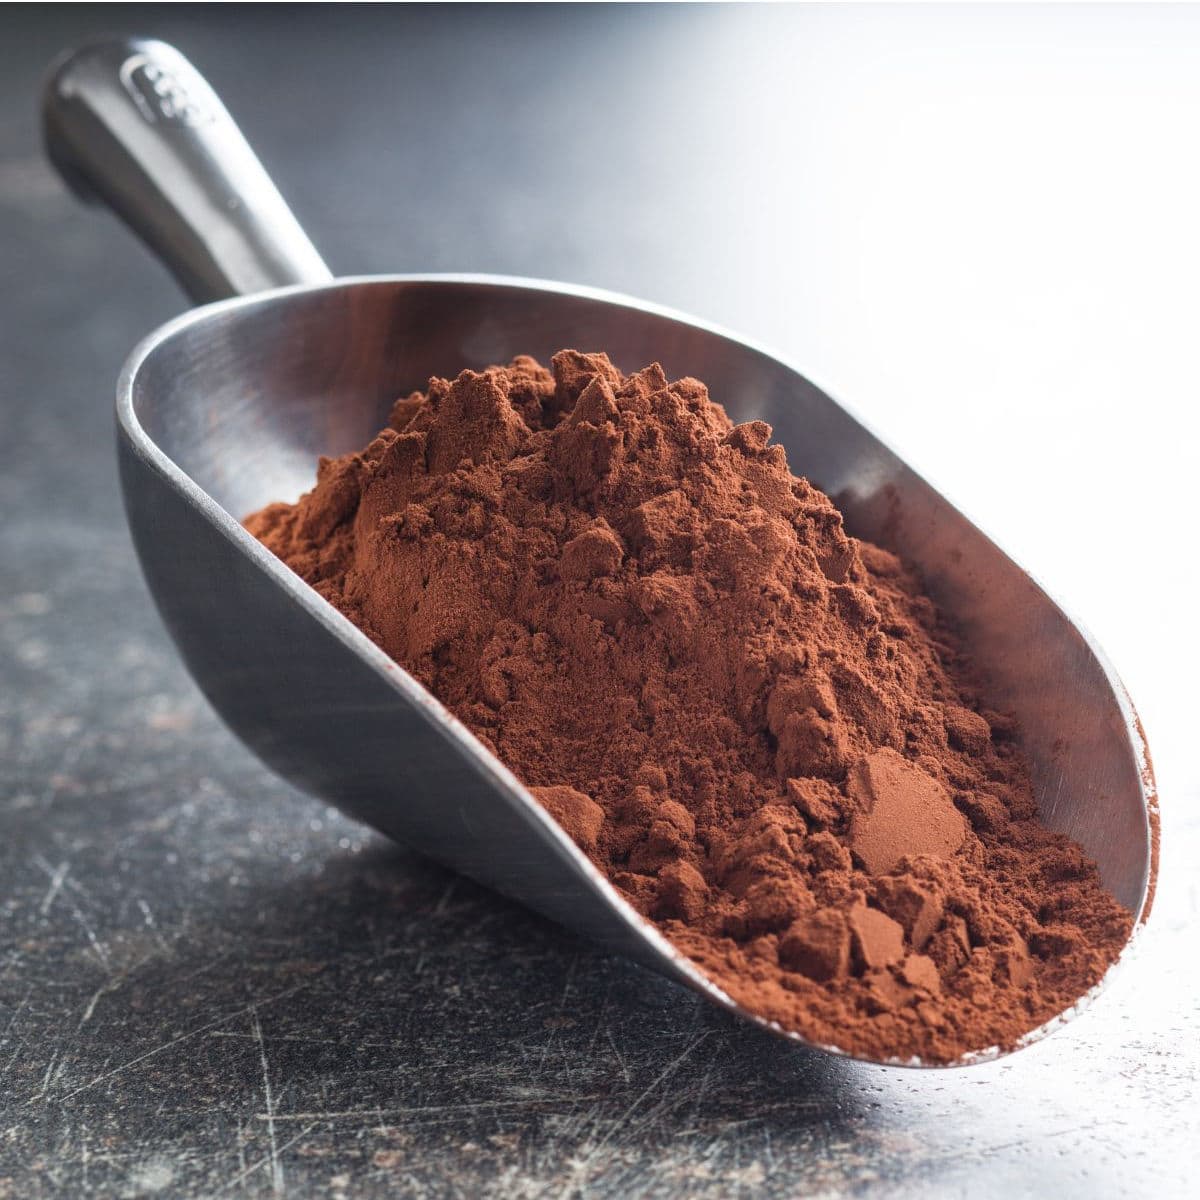 A scoop with cocoa powder in it.